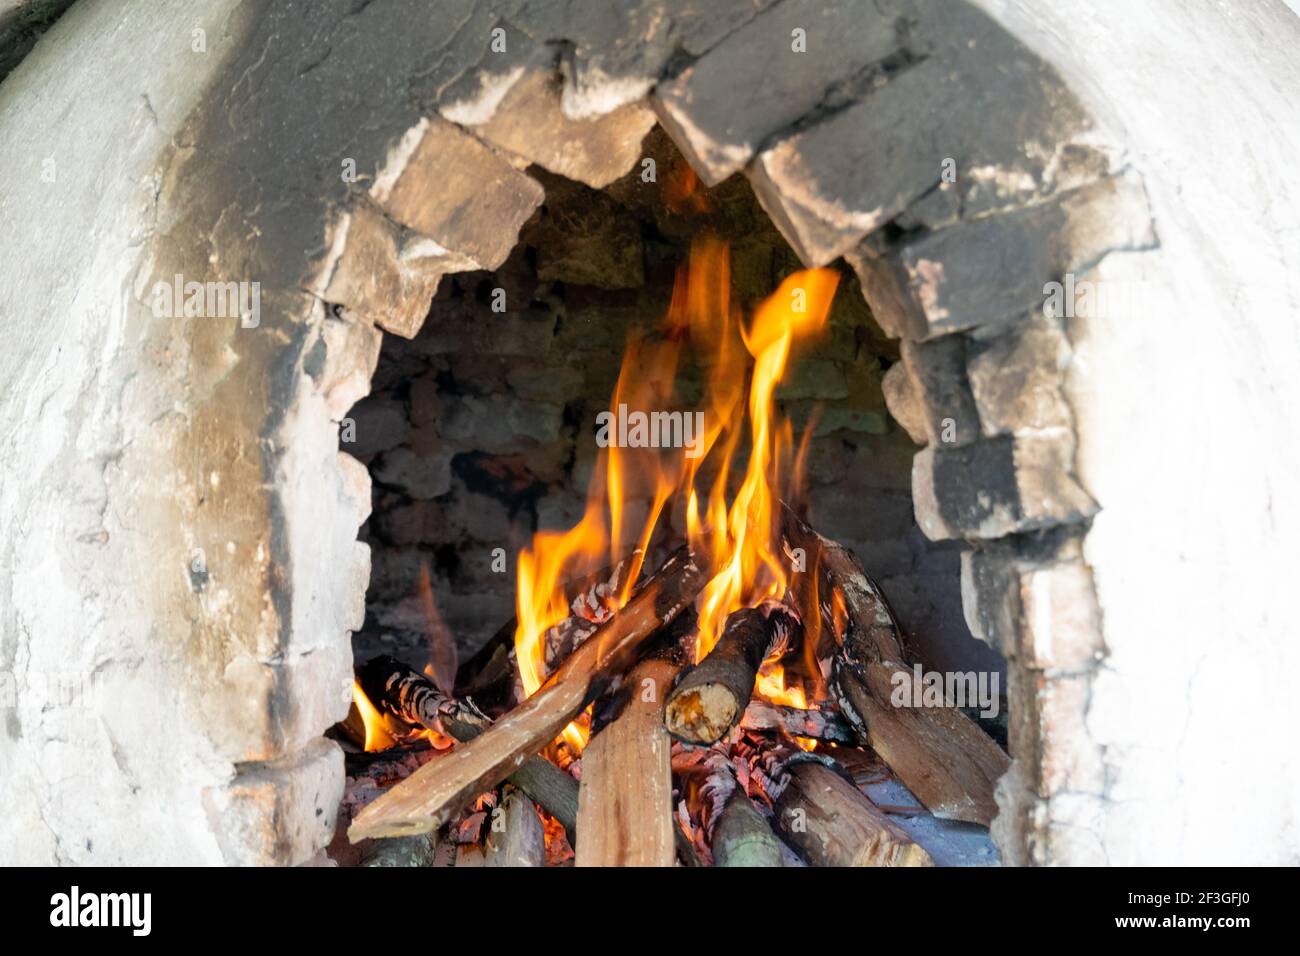 A selective focus of burning firewoods inside an old brick fireplace Stock Photo